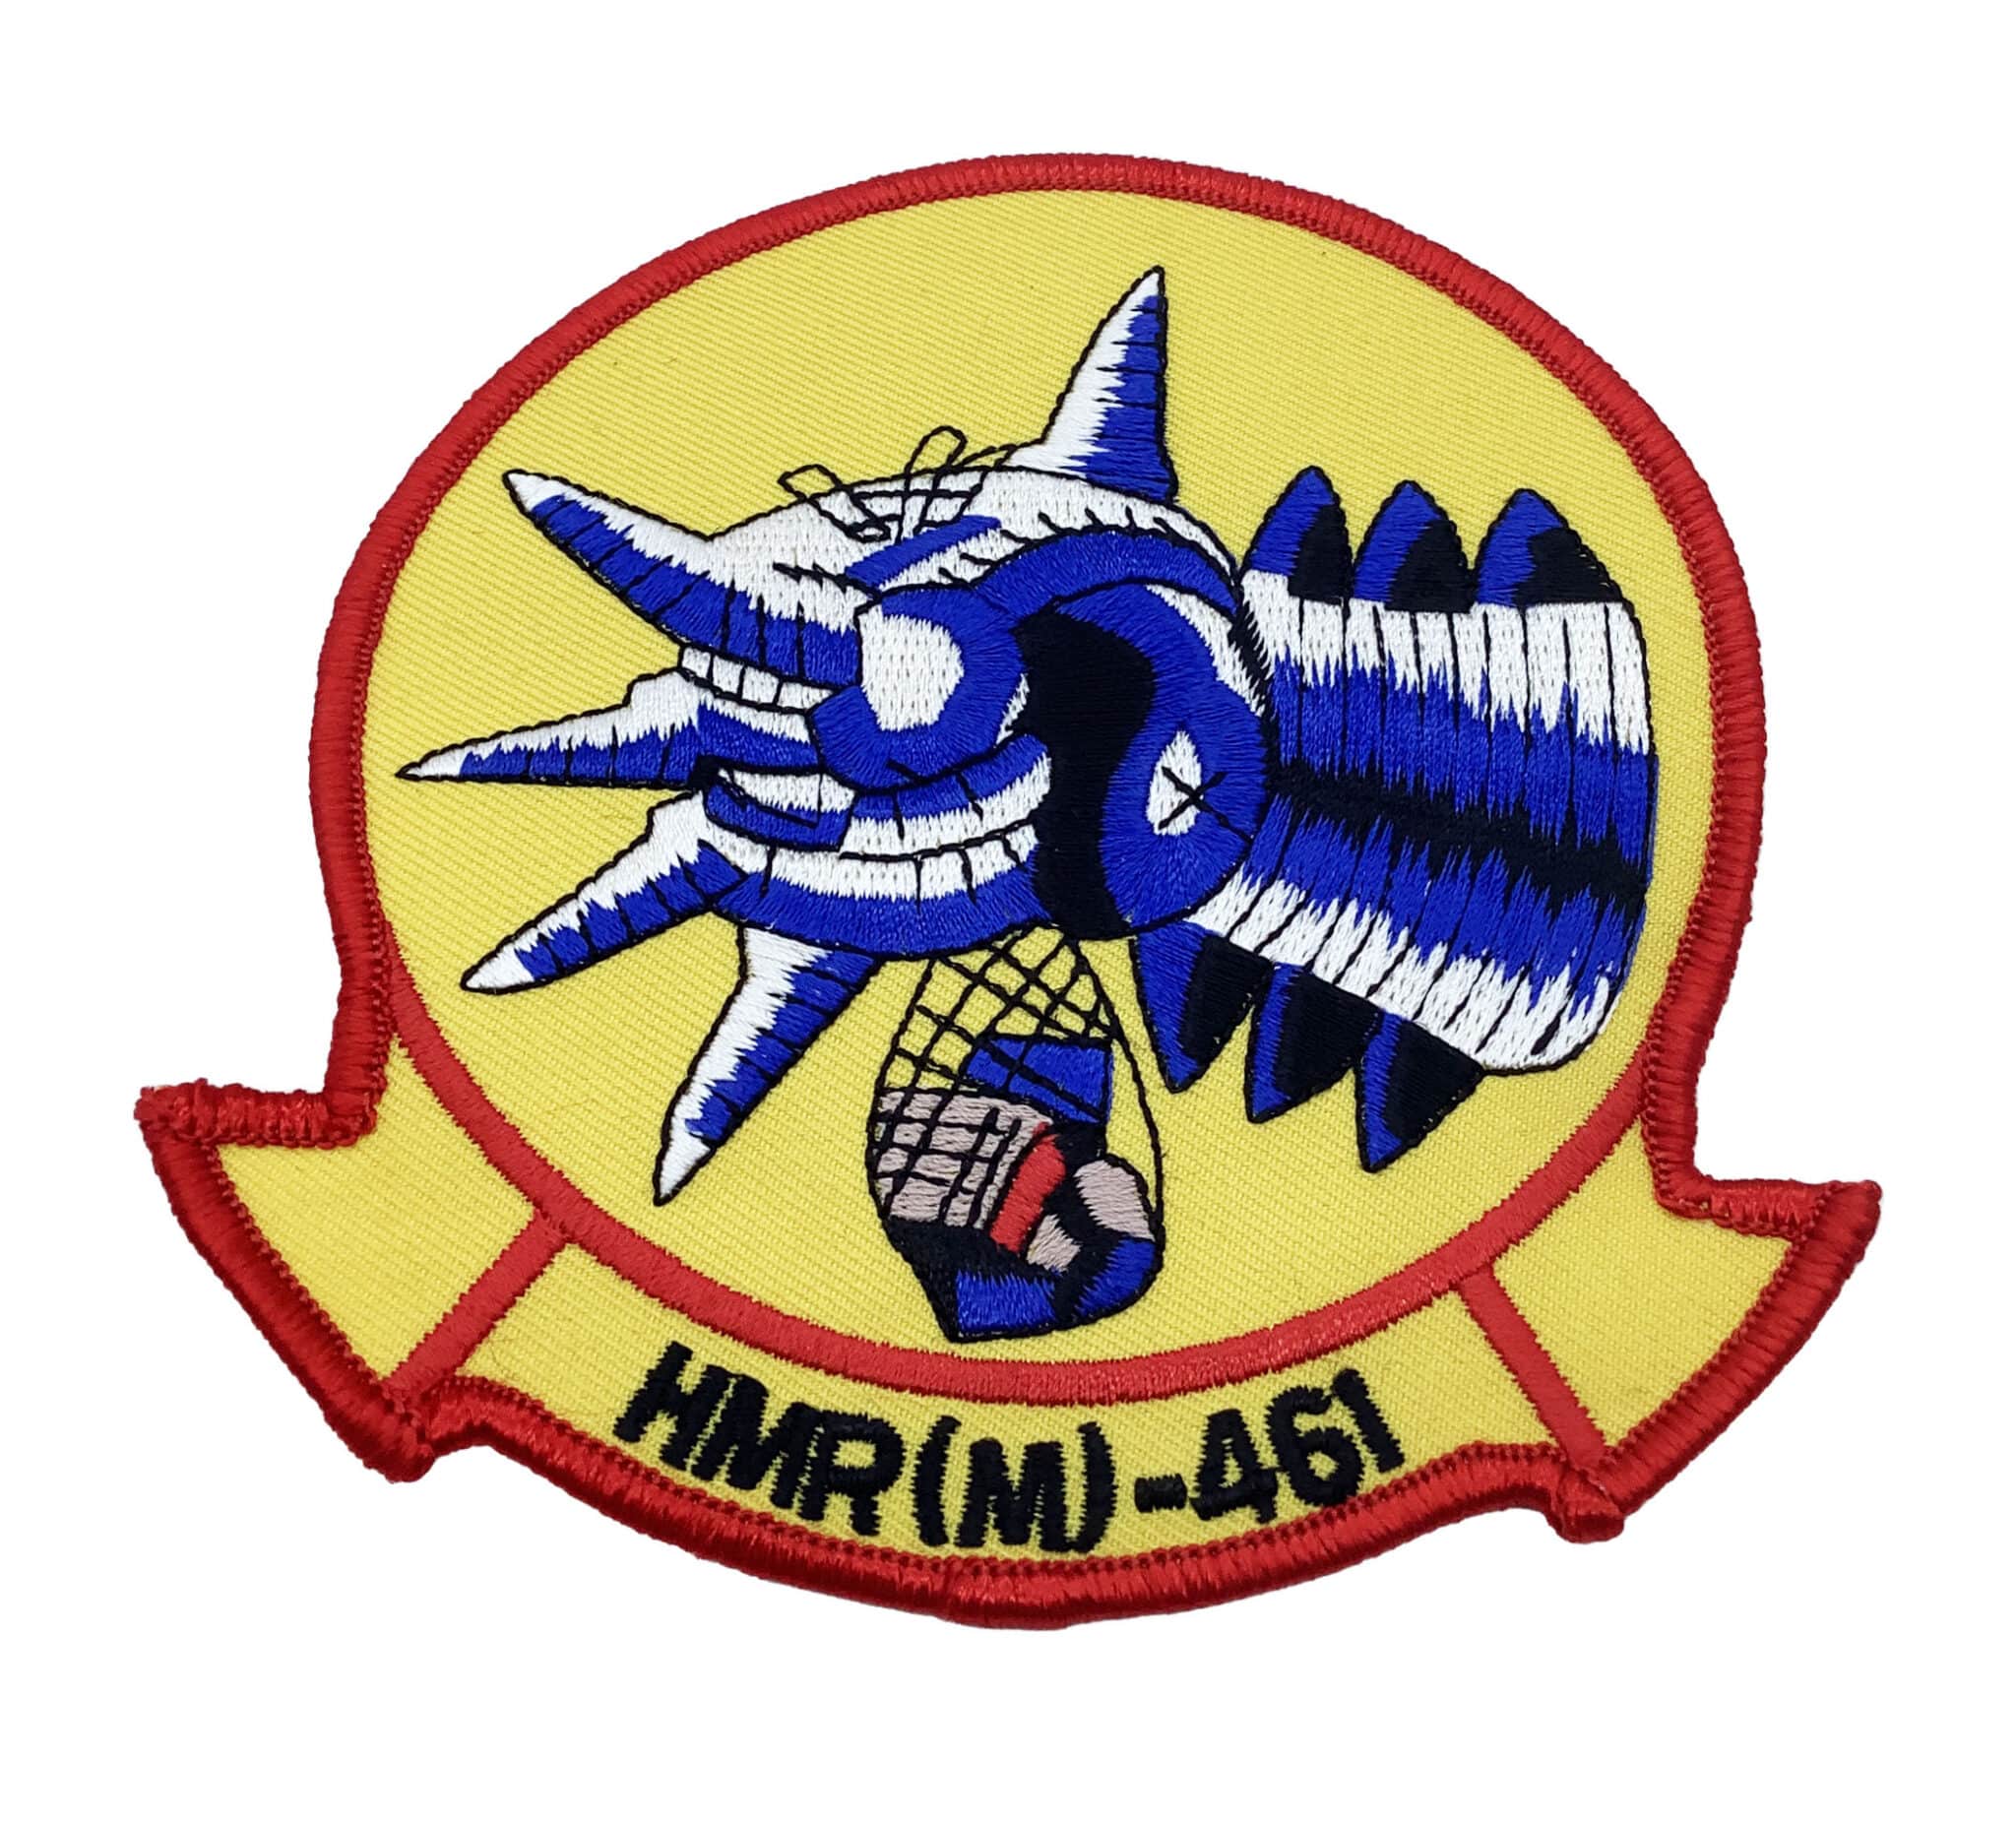 HMR(M) 461 Squadron Patch – No Hook and Loop